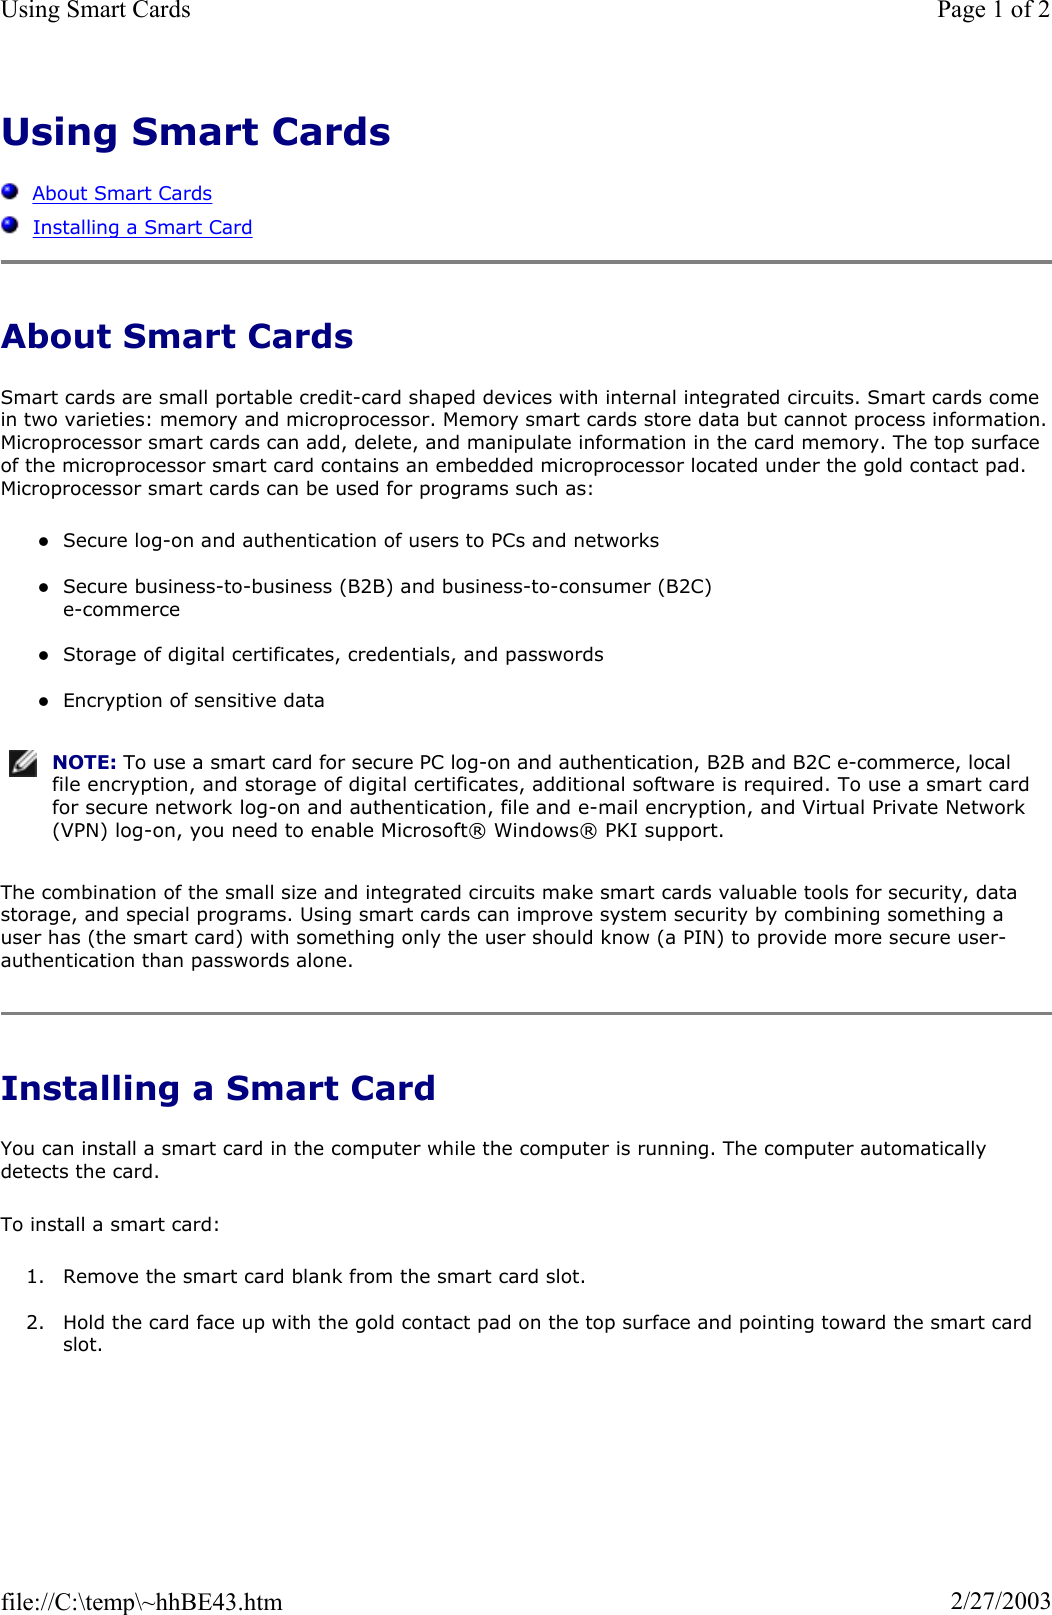 Using Smart CardsAbout Smart CardsInstalling a Smart CardAbout Smart Cards Smart cards are small portable credit-card shaped devices with internal integrated circuits. Smart cards come in two varieties: memory and microprocessor. Memory smart cards store data but cannot process information.Microprocessor smart cards can add, delete, and manipulate information in the card memory. The top surface of the microprocessor smart card contains an embedded microprocessor located under the gold contact pad. Microprocessor smart cards can be used for programs such as: zSecure log-on and authentication of users to PCs and networks zSecure business-to-business (B2B) and business-to-consumer (B2C)  e-commerce zStorage of digital certificates, credentials, and passwords zEncryption of sensitive data The combination of the small size and integrated circuits make smart cards valuable tools for security, data storage, and special programs. Using smart cards can improve system security by combining something a user has (the smart card) with something only the user should know (a PIN) to provide more secure user-authentication than passwords alone. Installing a Smart Card You can install a smart card in the computer while the computer is running. The computer automatically detects the card. To install a smart card: 1. Remove the smart card blank from the smart card slot. 2. Hold the card face up with the gold contact pad on the top surface and pointing toward the smart card slot.NOTE: To use a smart card for secure PC log-on and authentication, B2B and B2C e-commerce, local file encryption, and storage of digital certificates, additional software is required. To use a smart card for secure network log-on and authentication, file and e-mail encryption, and Virtual Private Network (VPN) log-on, you need to enable Microsoft® Windows® PKI support.Page 1 of 2Using Smart Cards2/27/2003file://C:\temp\~hhBE43.htm